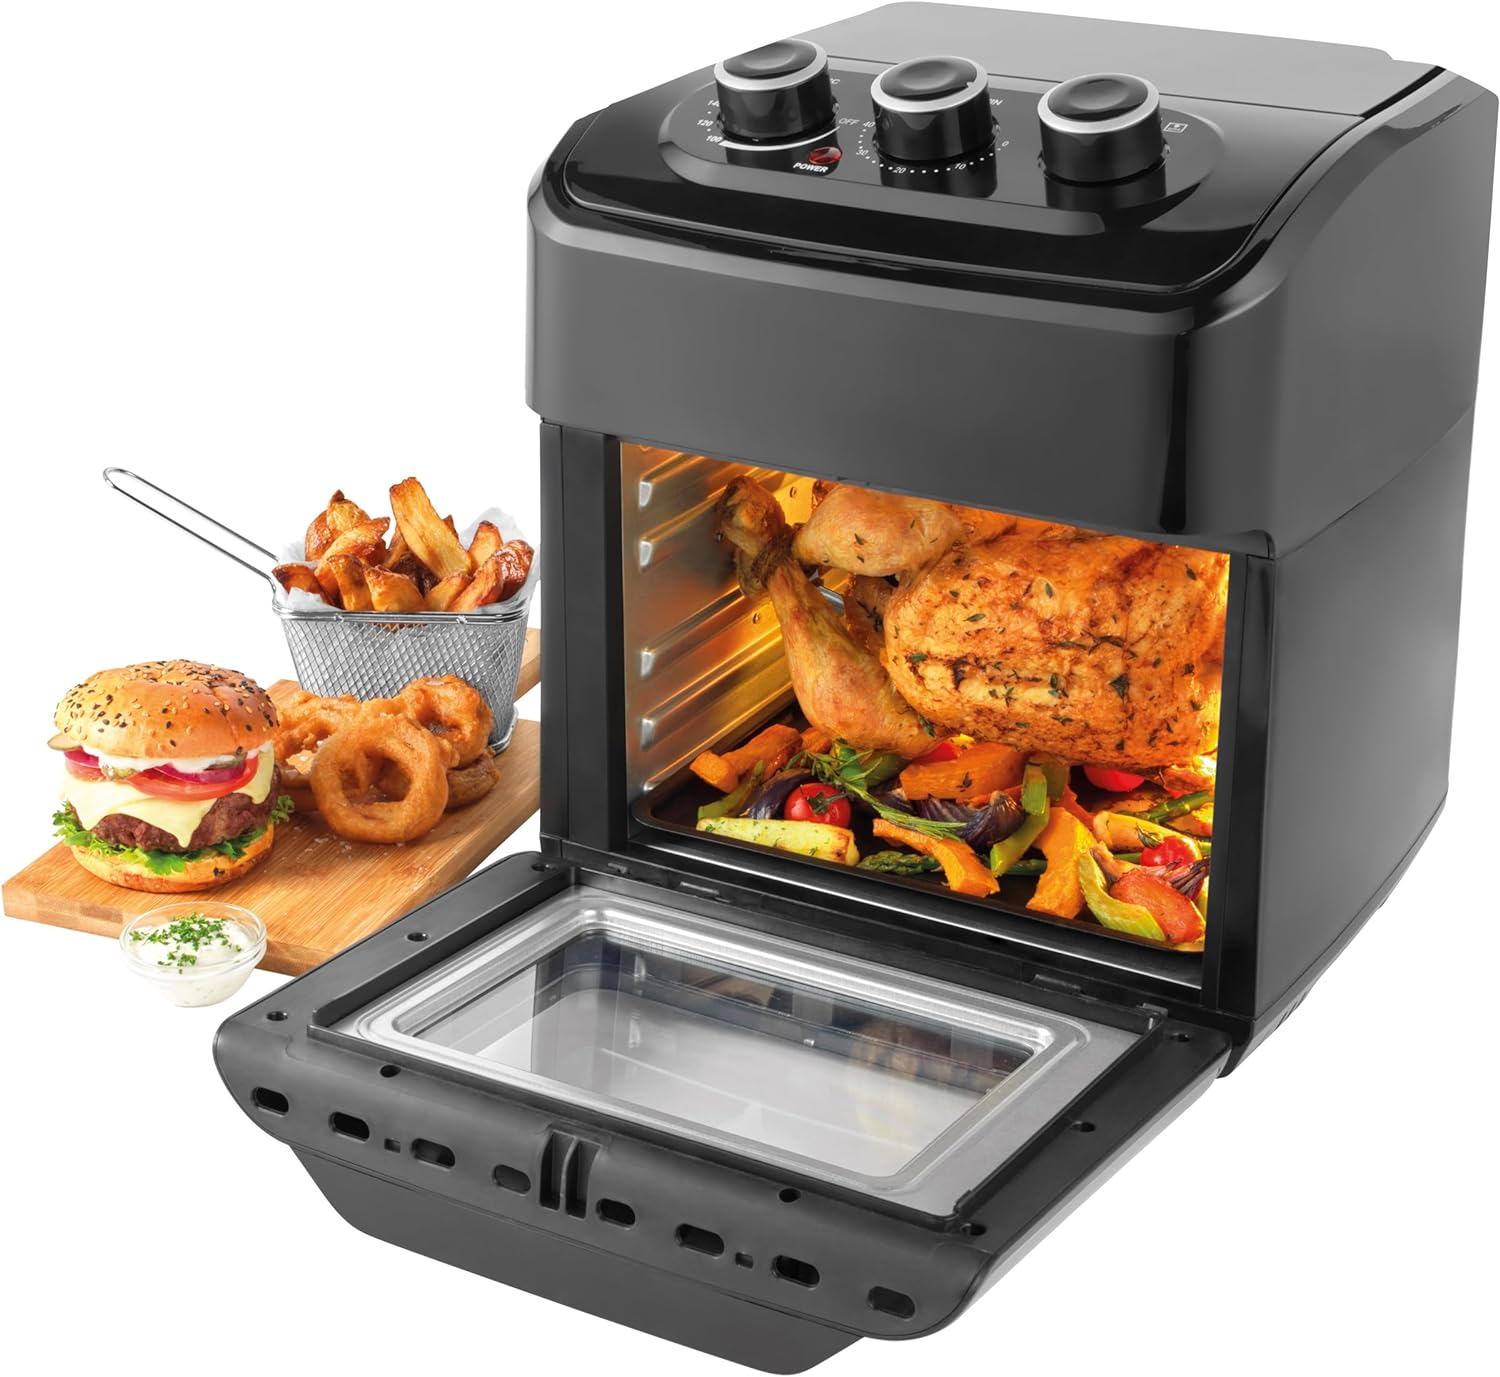 Salter EK5603 XL Air Fryer Oven – Air Fry, Roast, Rotisserie, Toast Bake, 12 L, No Preheating Needed, Includes 3 Cooking Racks Rotisserie Accessories, 3 Dial Control, 60 Minute Timer, 1800W